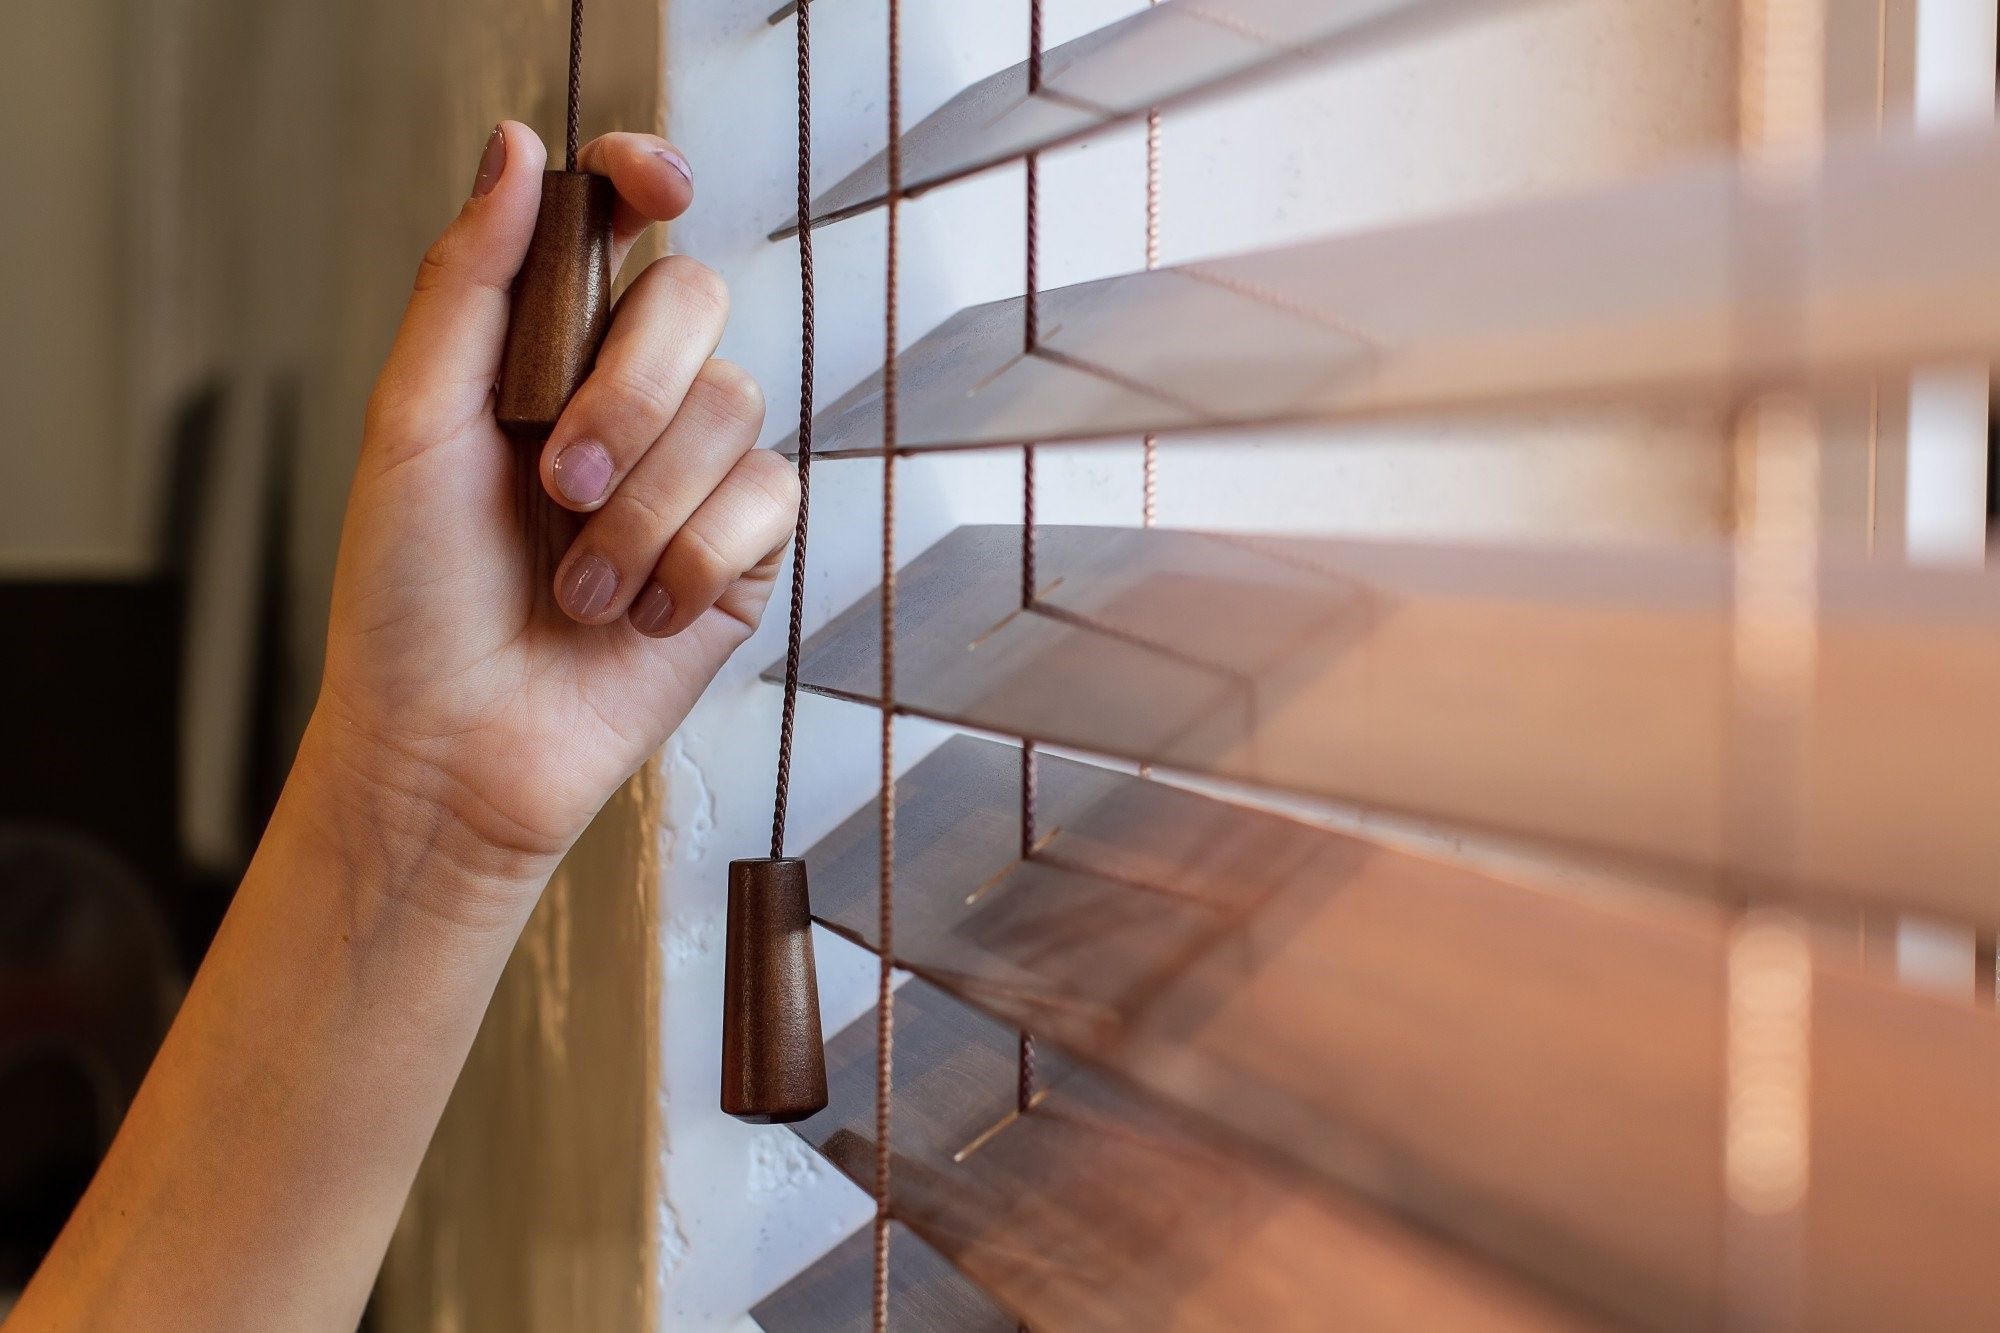 How To Remove Blinds